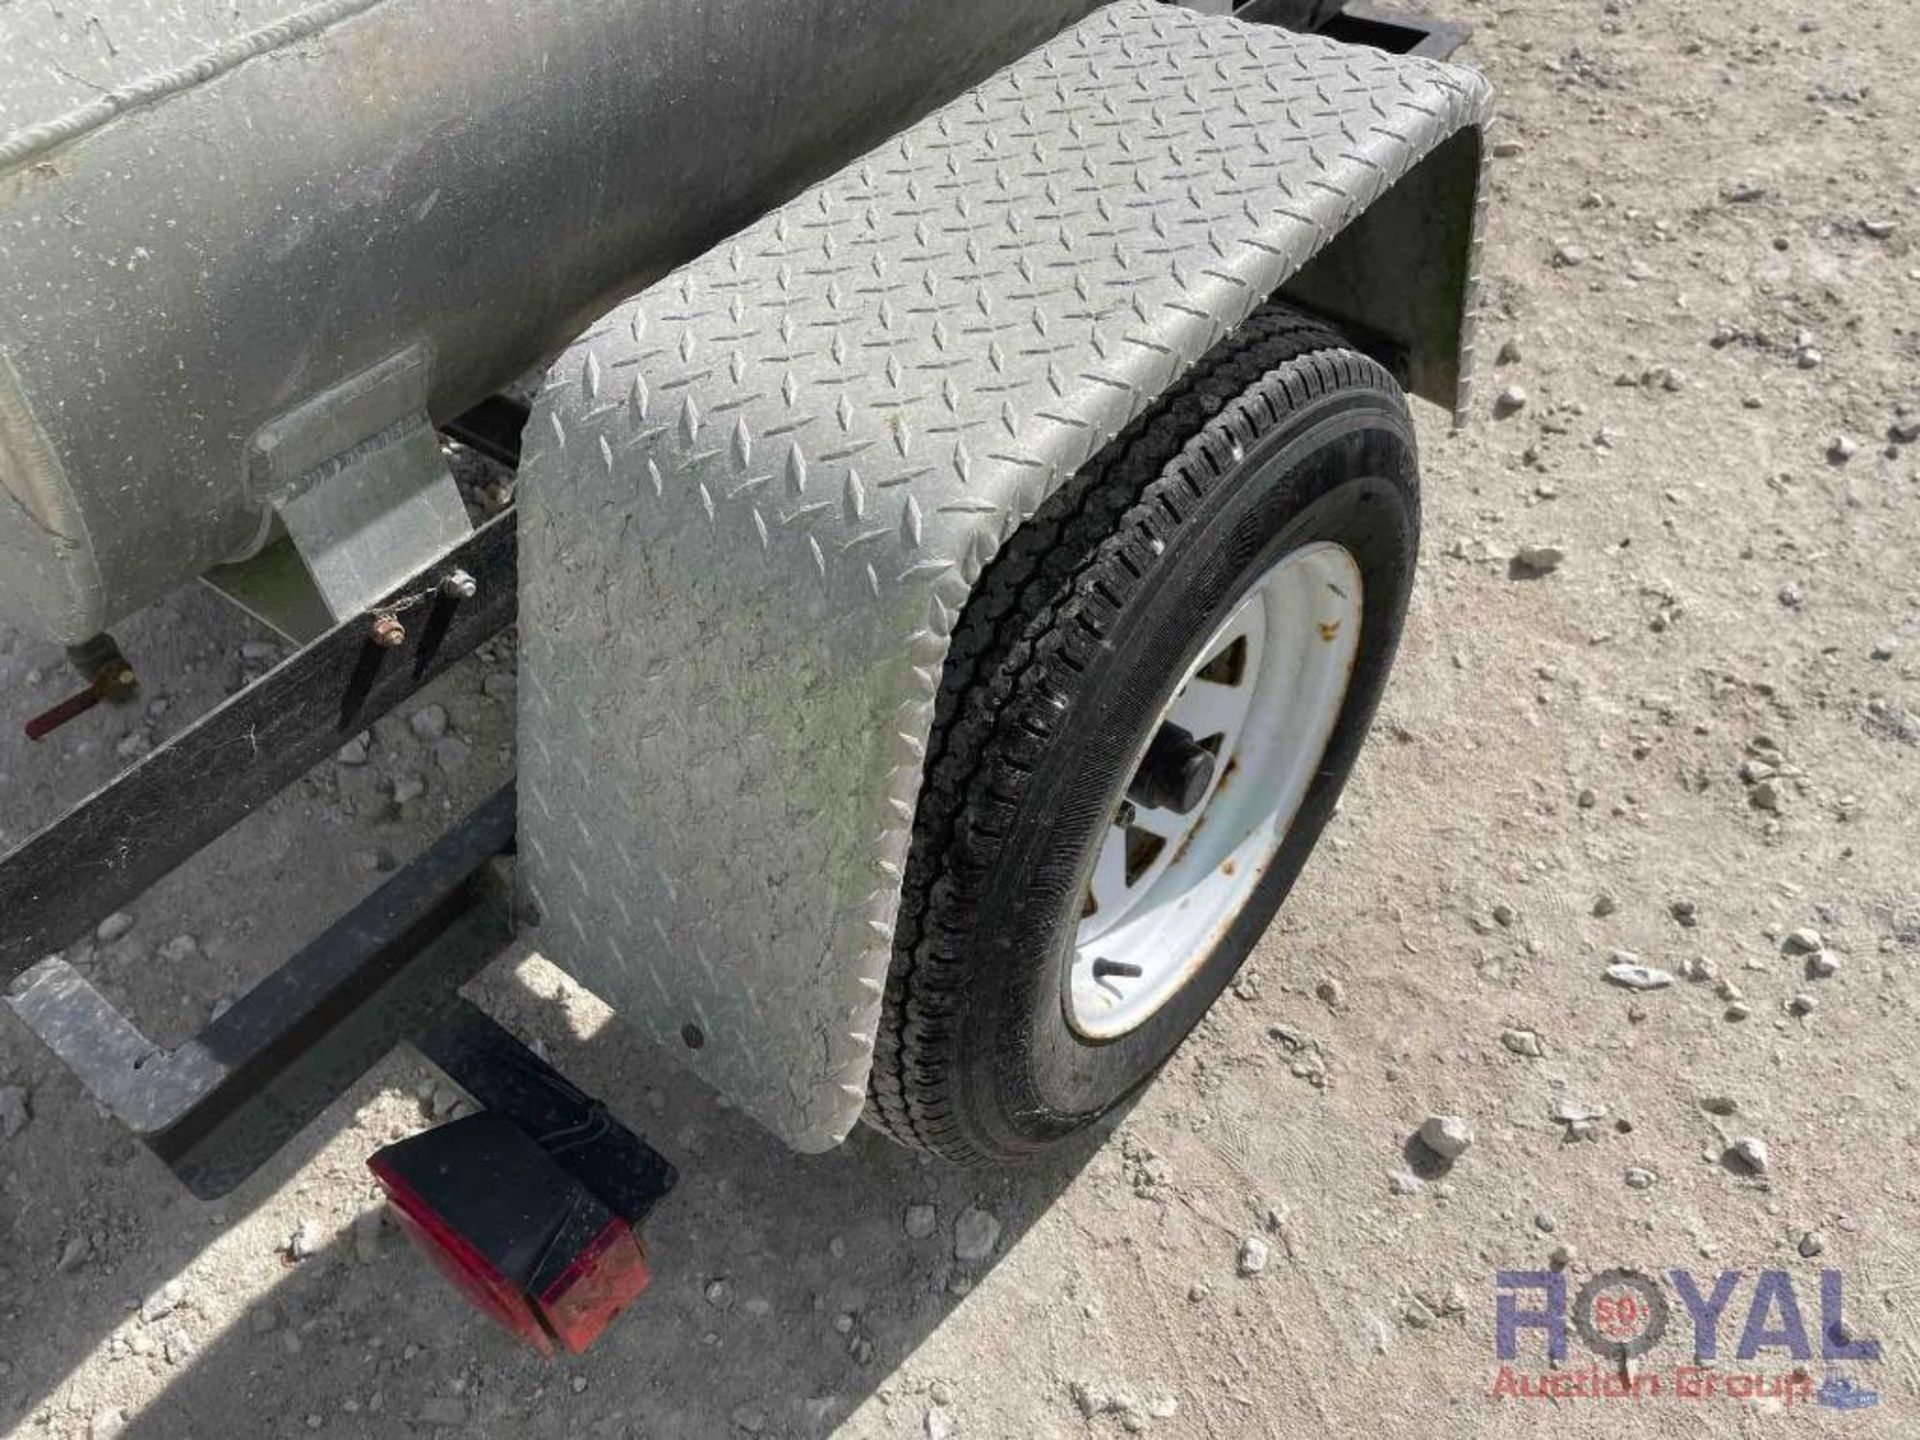 Fuel Tank with Hose, Nozzle and Meter S/A Towable Trailer - Image 10 of 10